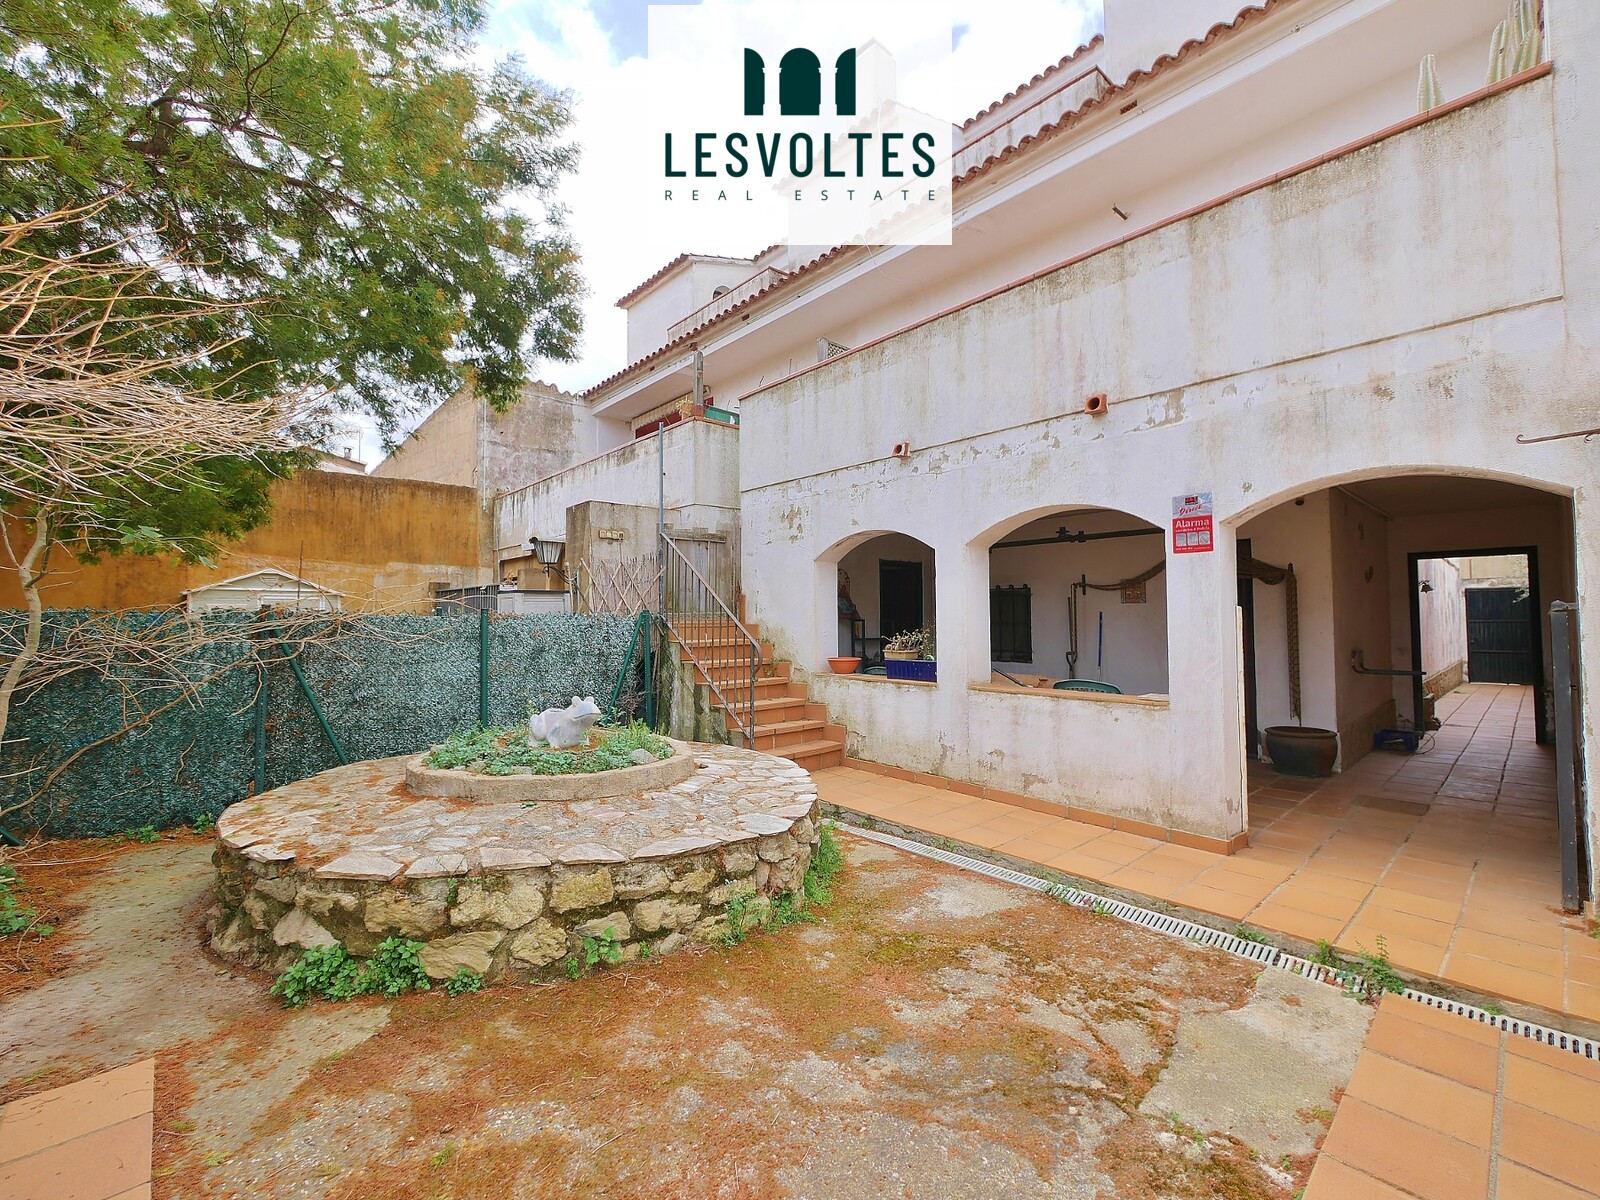 SPACIOUS APARTMENT WITH GARDEN AND TERRACE, PRIVATE GARAGE OF 60 M2 AND INDEPENDENT STUDIO IN PALAFRUGELL.